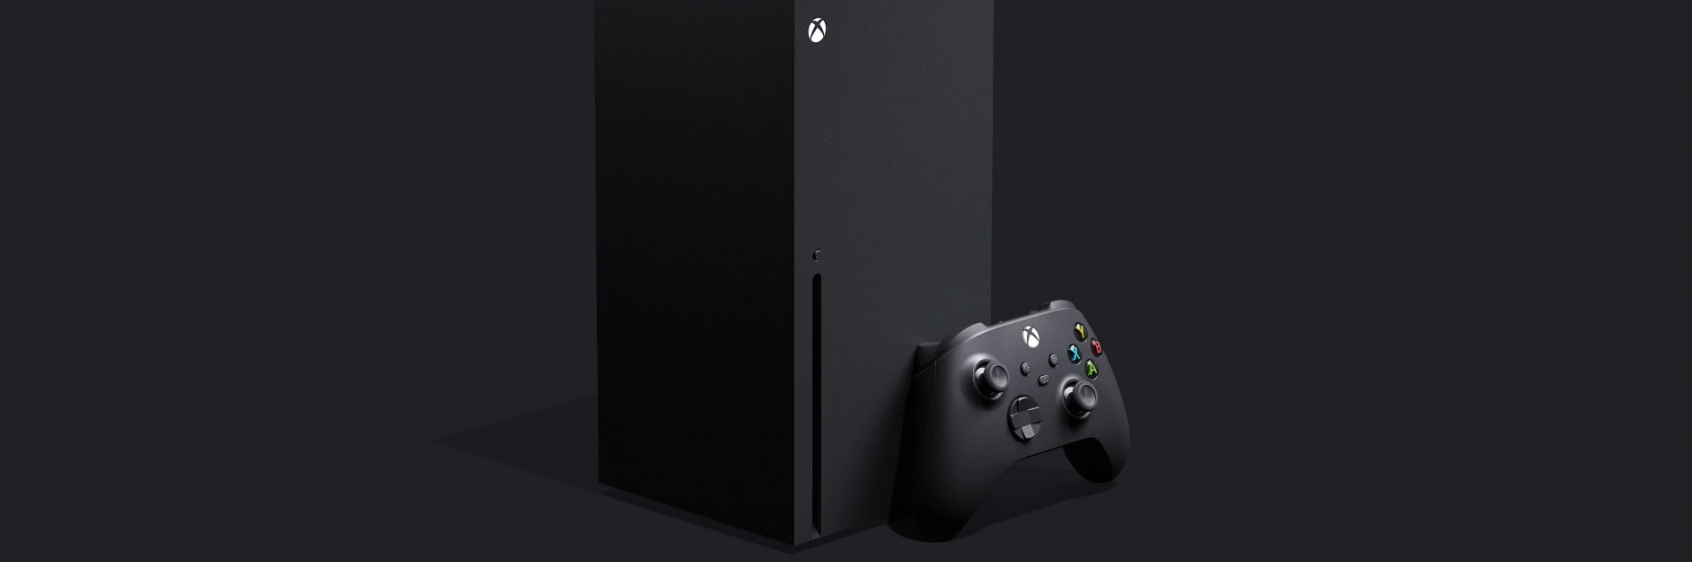 Xbox Series X Supports DirectX 12_2